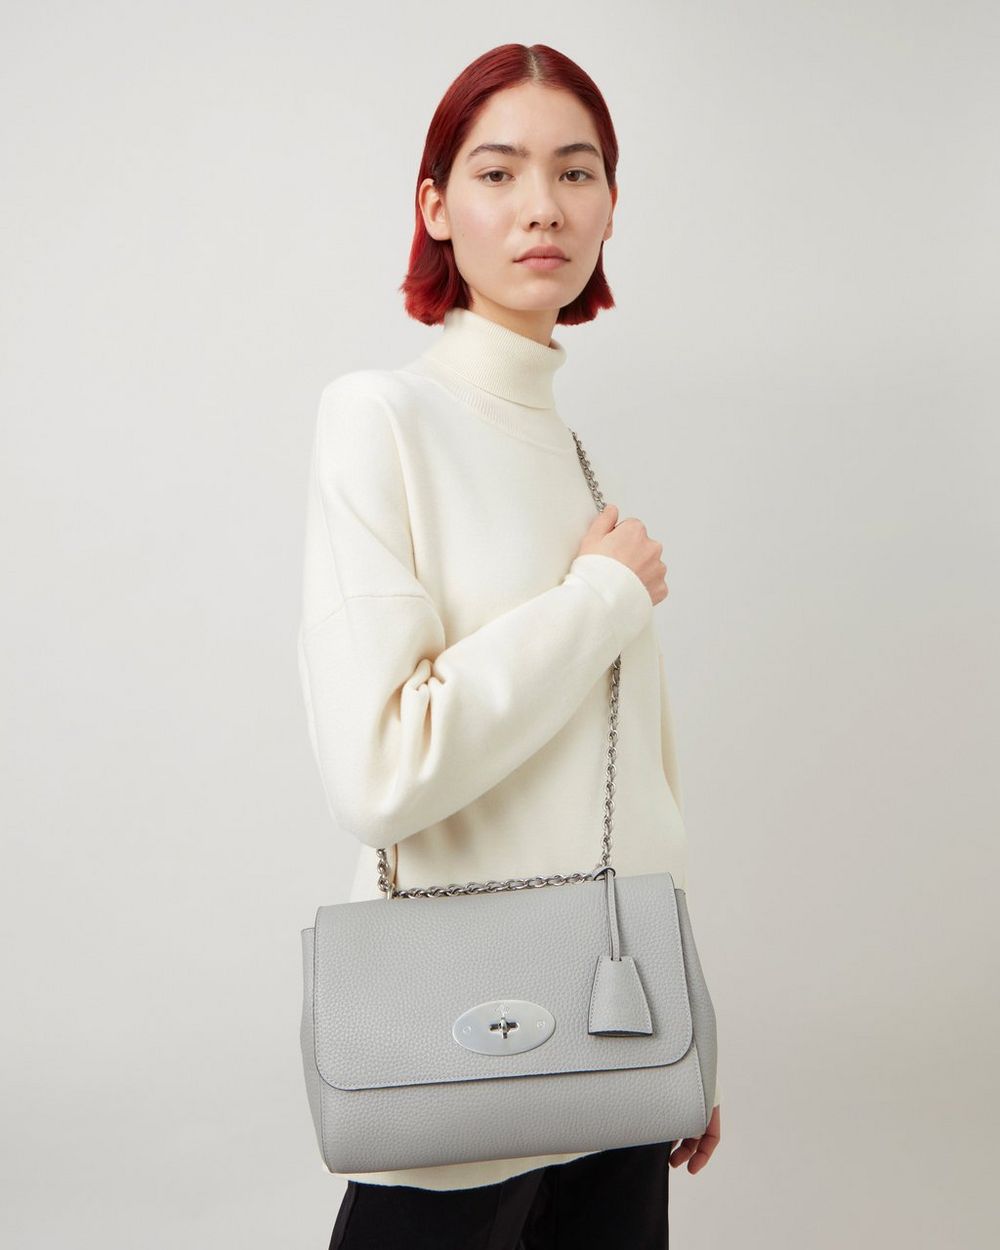 Grey Mulberry Bag (Gal Meets Glam)